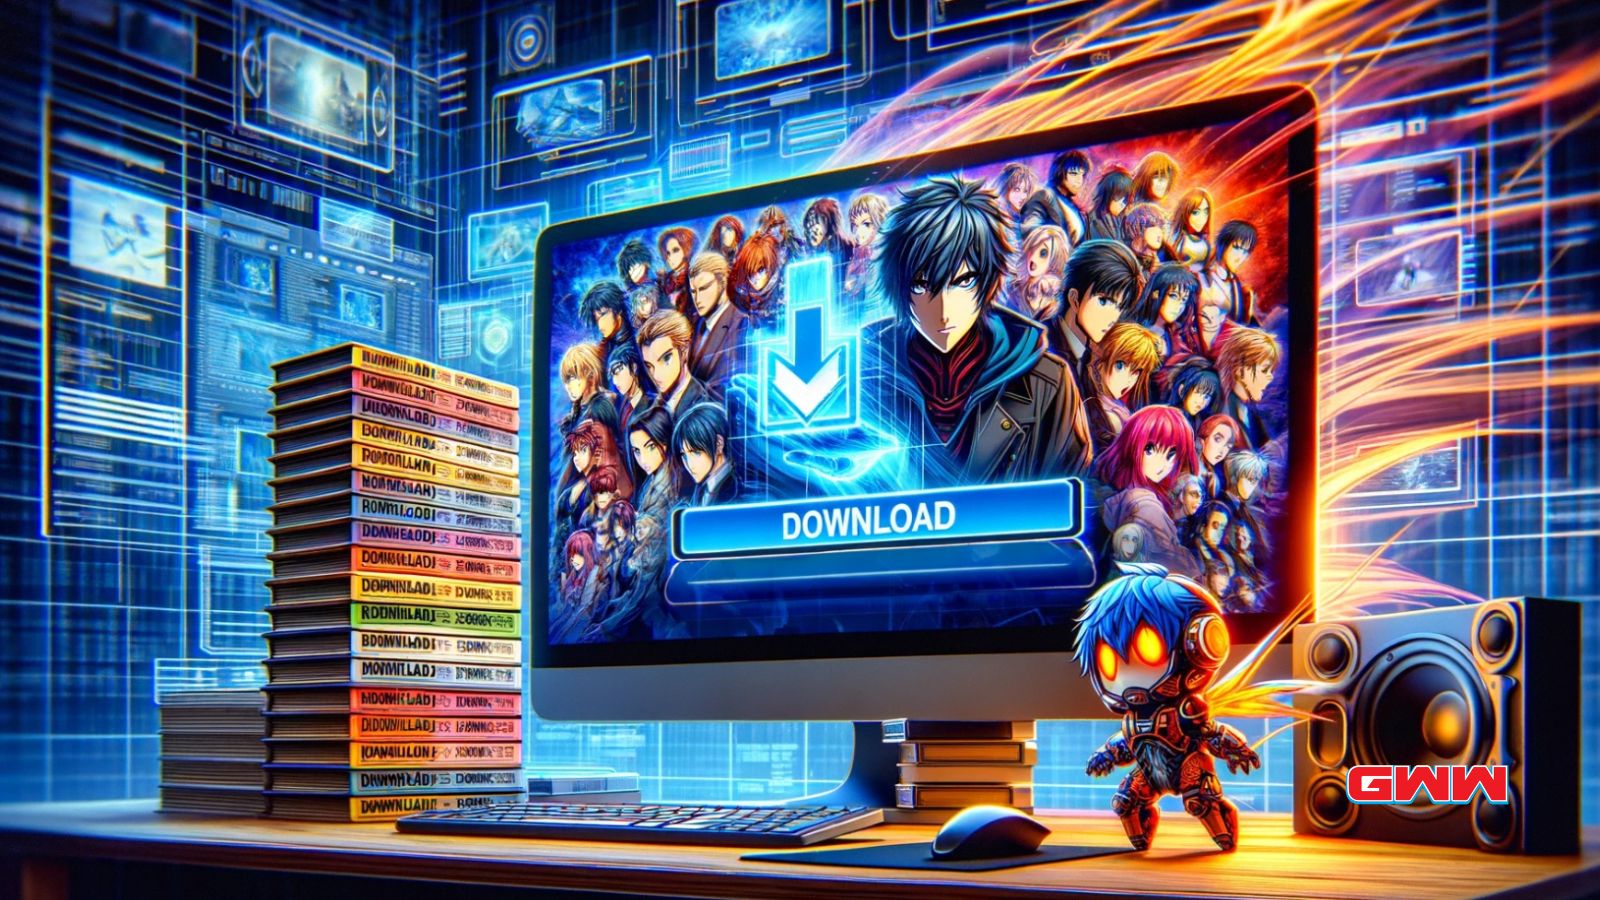 A dynamic and detailed widescreen image illustrating the process of downloading full anime seasons at once.